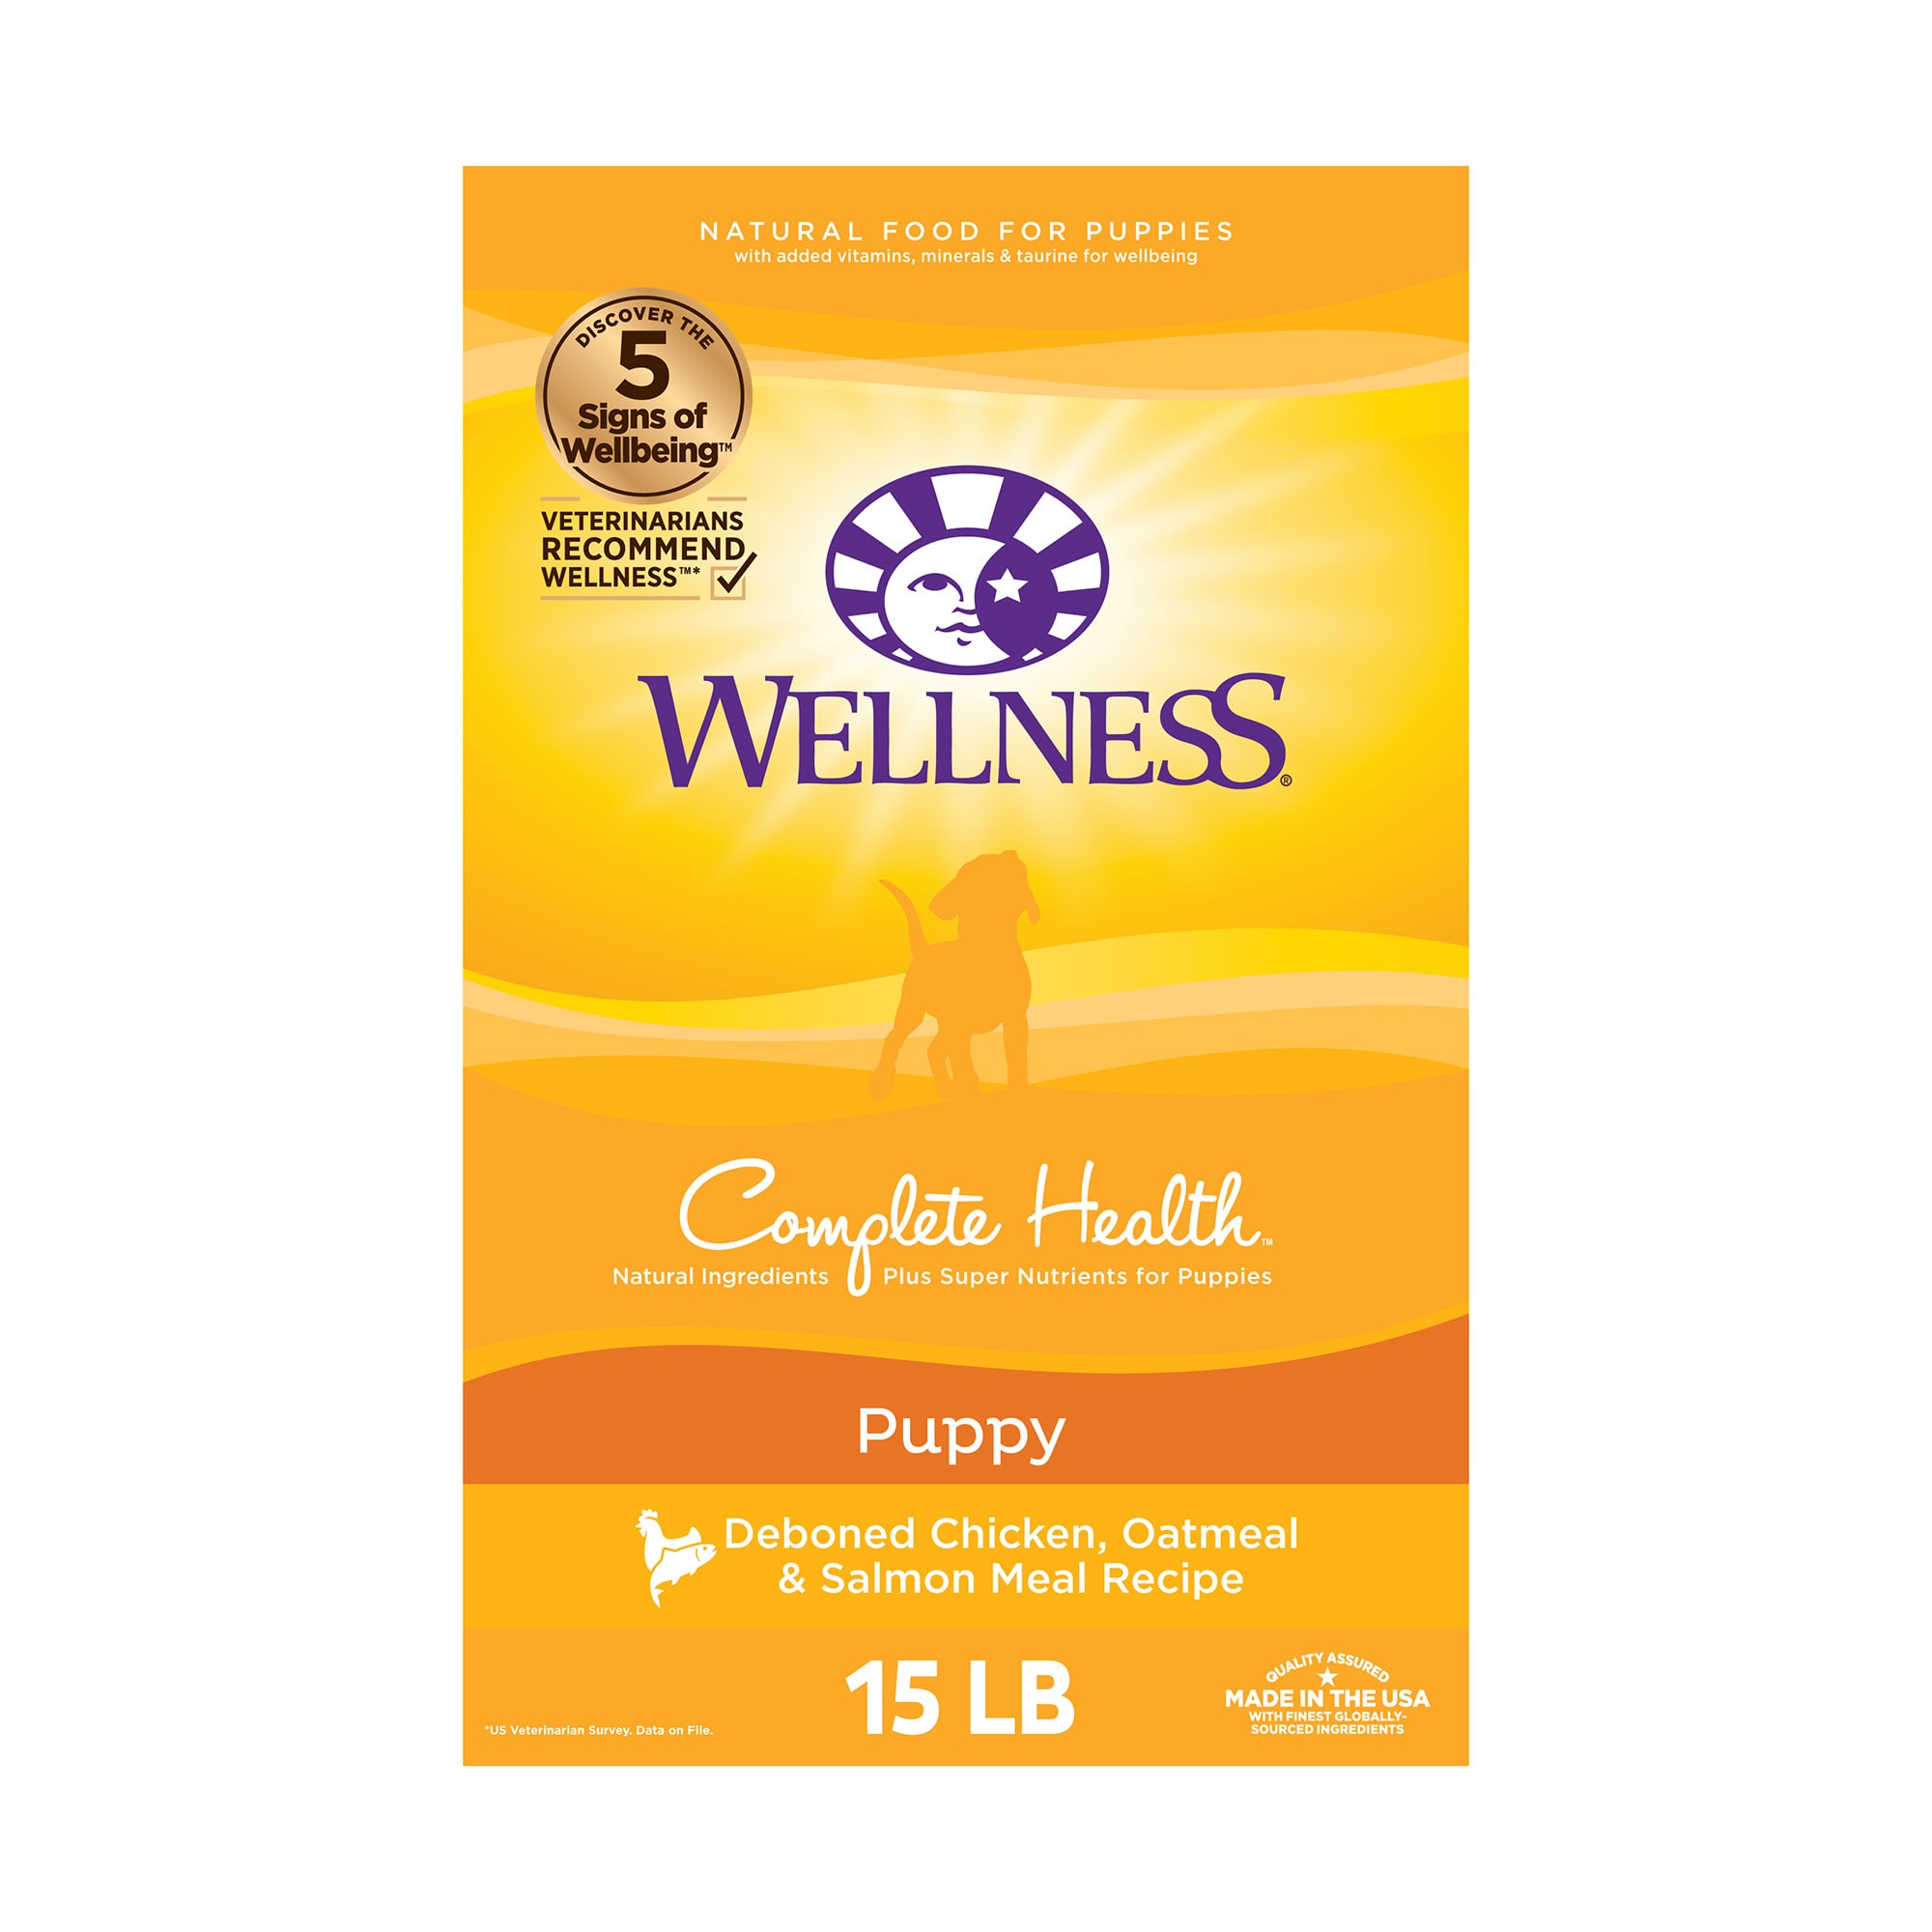 Photos - Dog Food Wellness Complete Health - Dry Puppy Food Recipe Includes Balance 